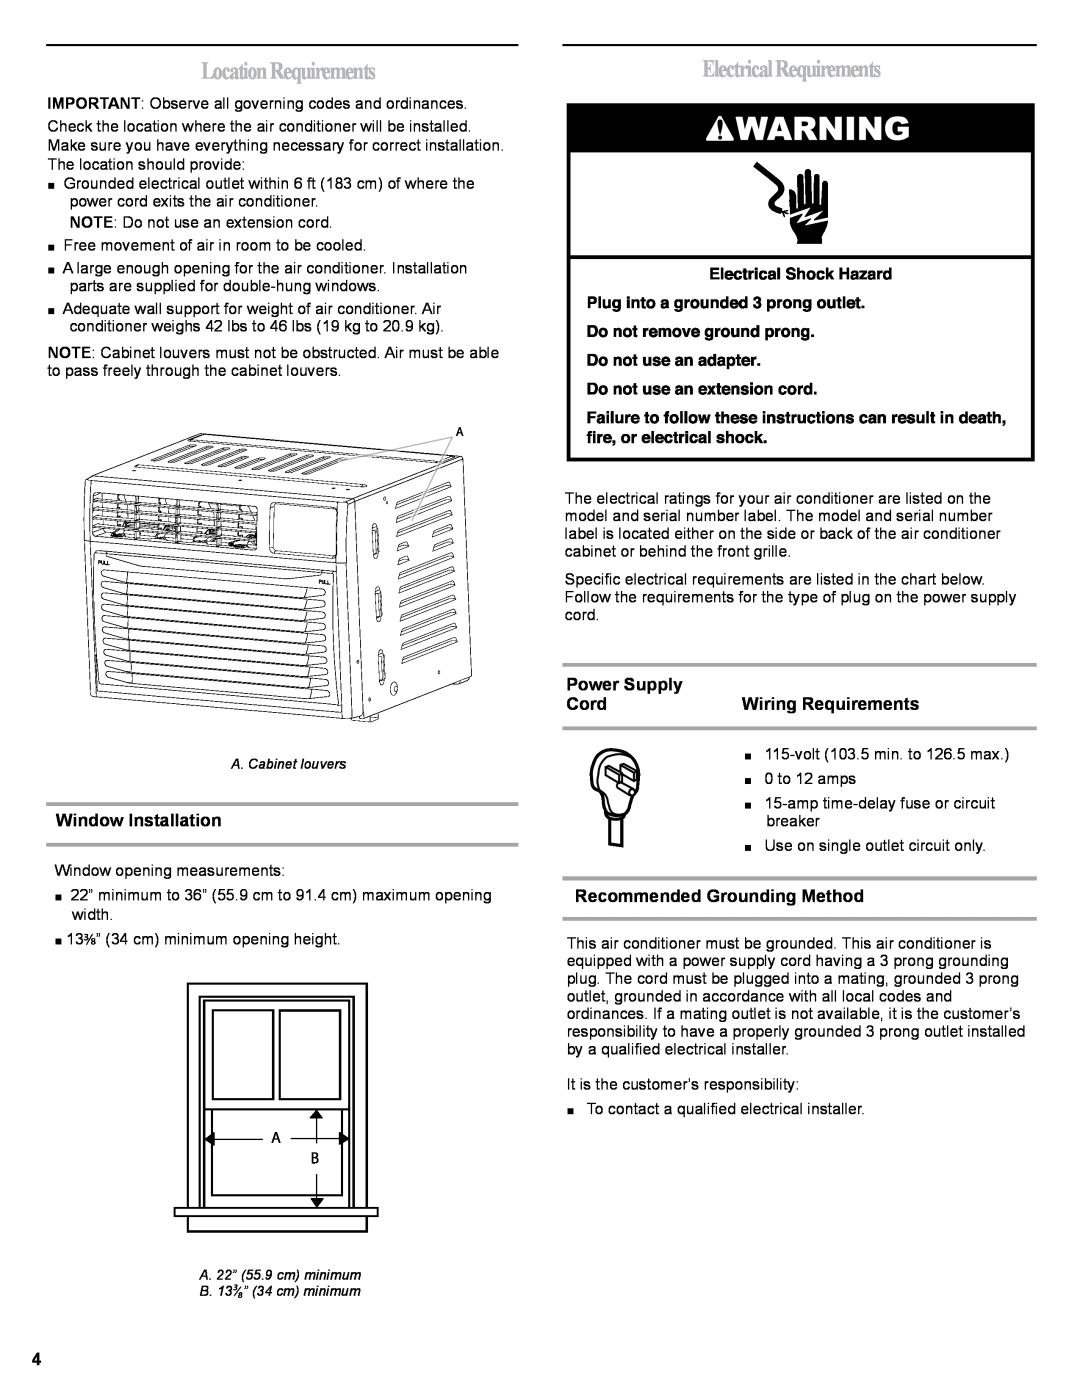 Haier HWR06XCJ LocationRequirements, ElectricalRequirements, Window Installation, Power Supply, Wiring Requirements, Cord 